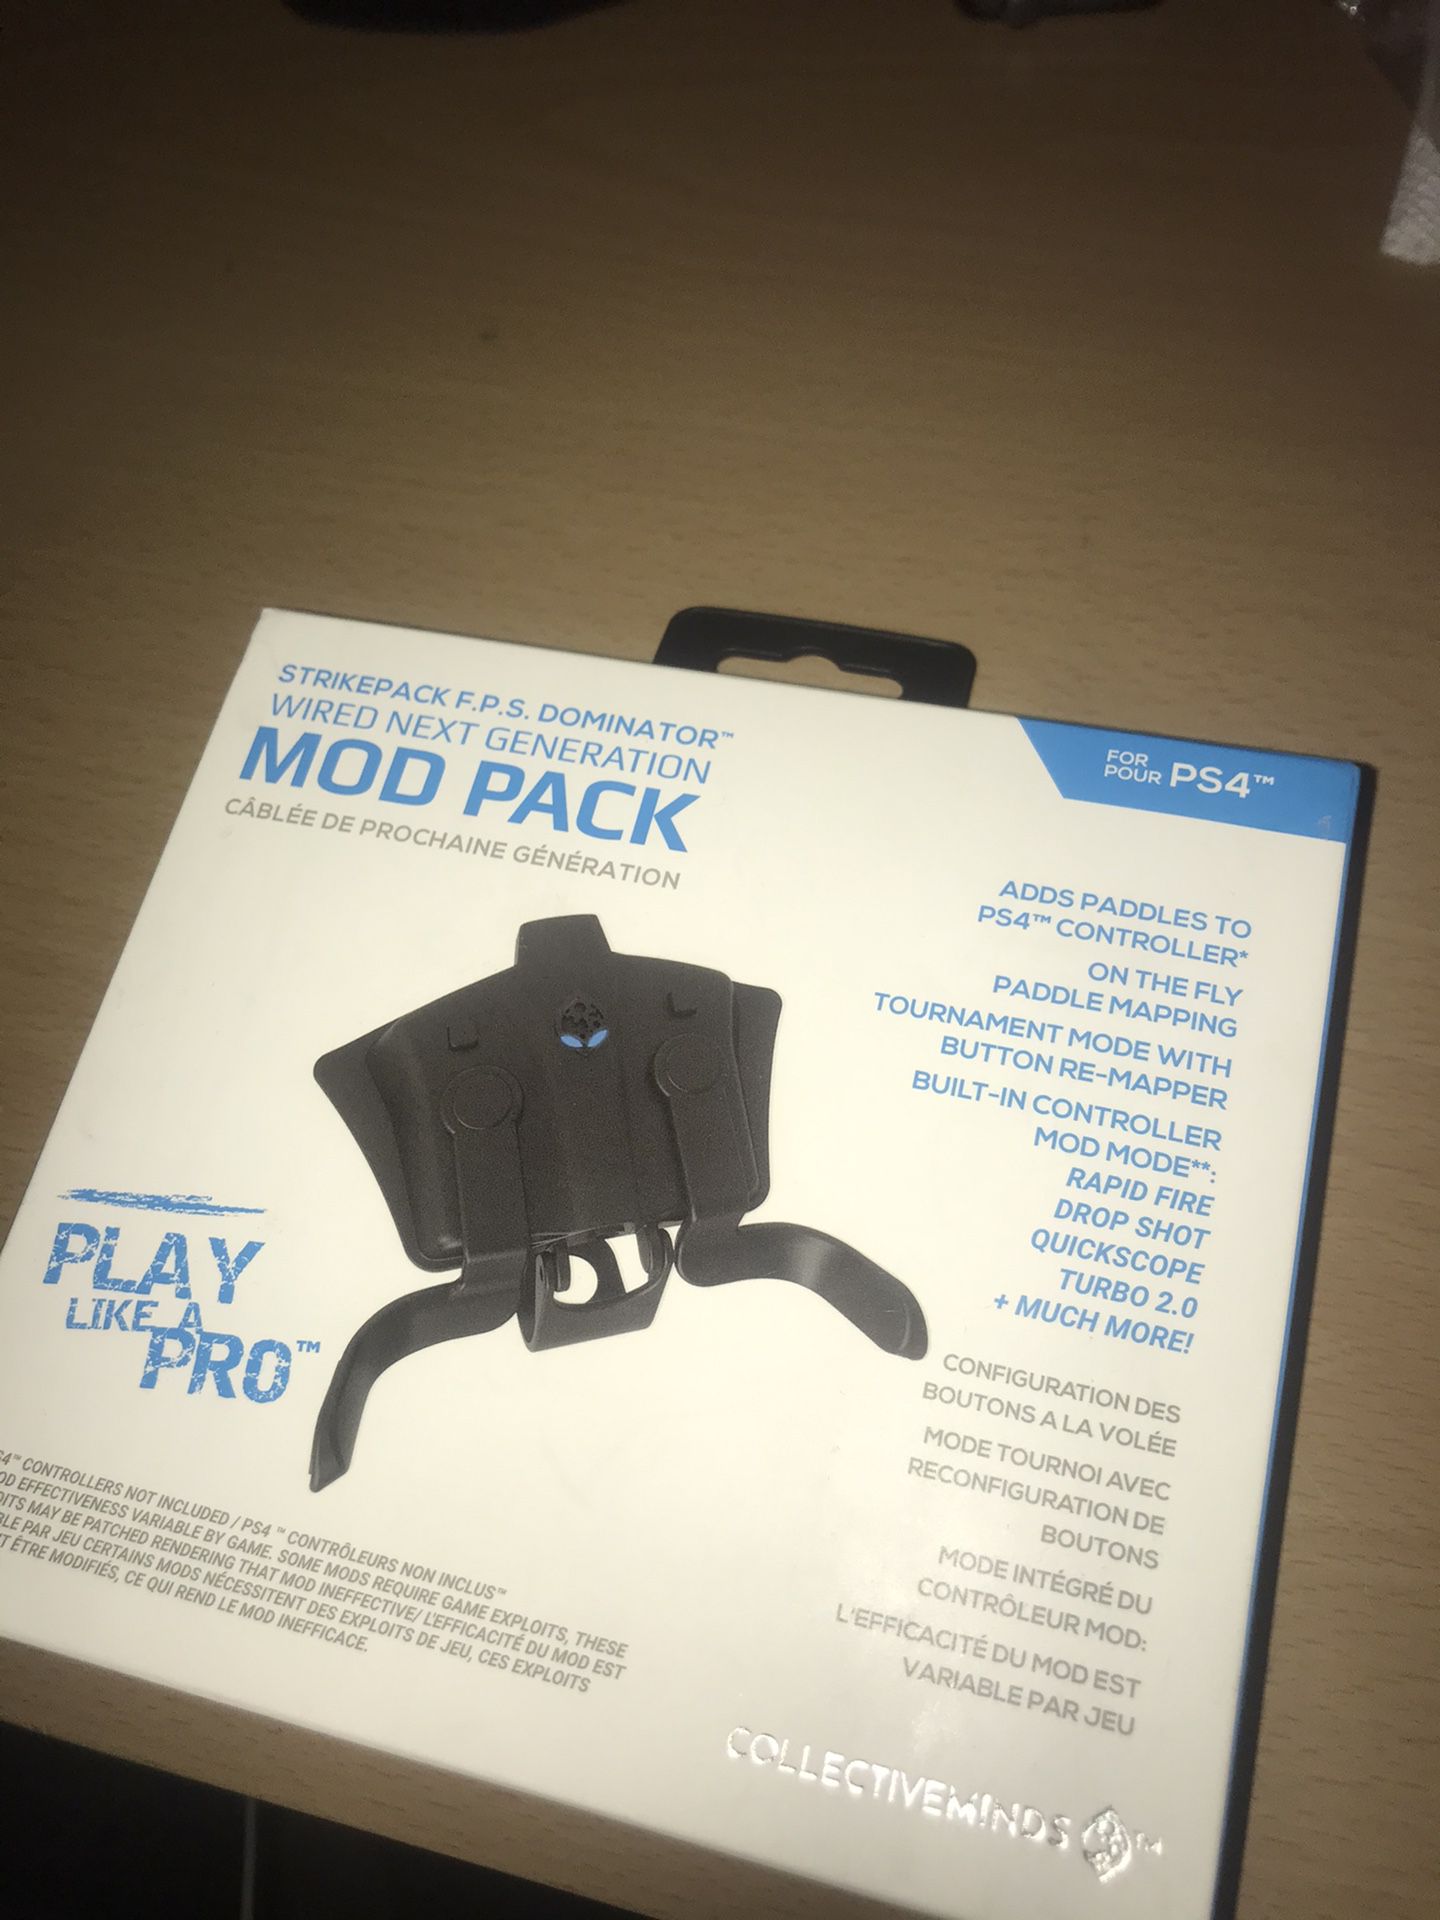 Mod pack for PS4